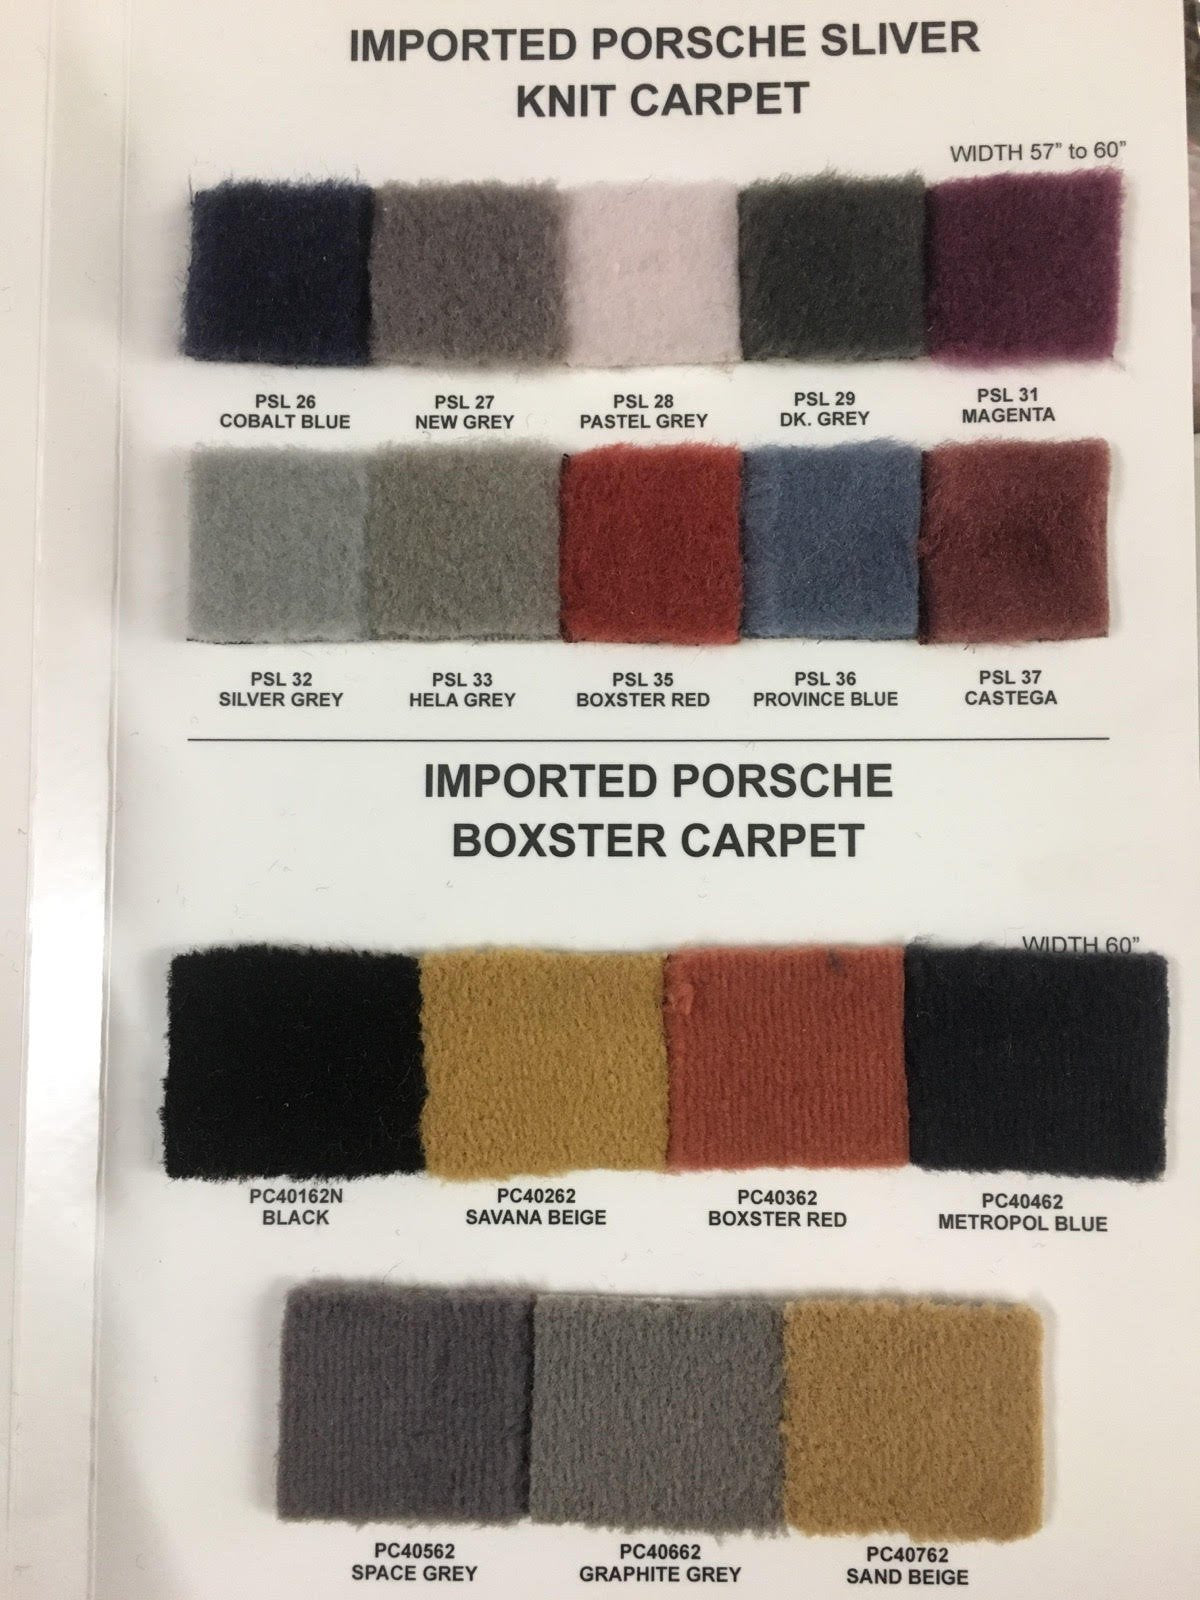 imported-german-porsche-sliver-knit-boxster-carpet-fabric-57-60-wide-automotive-upholstery-fabric-by-the-yard